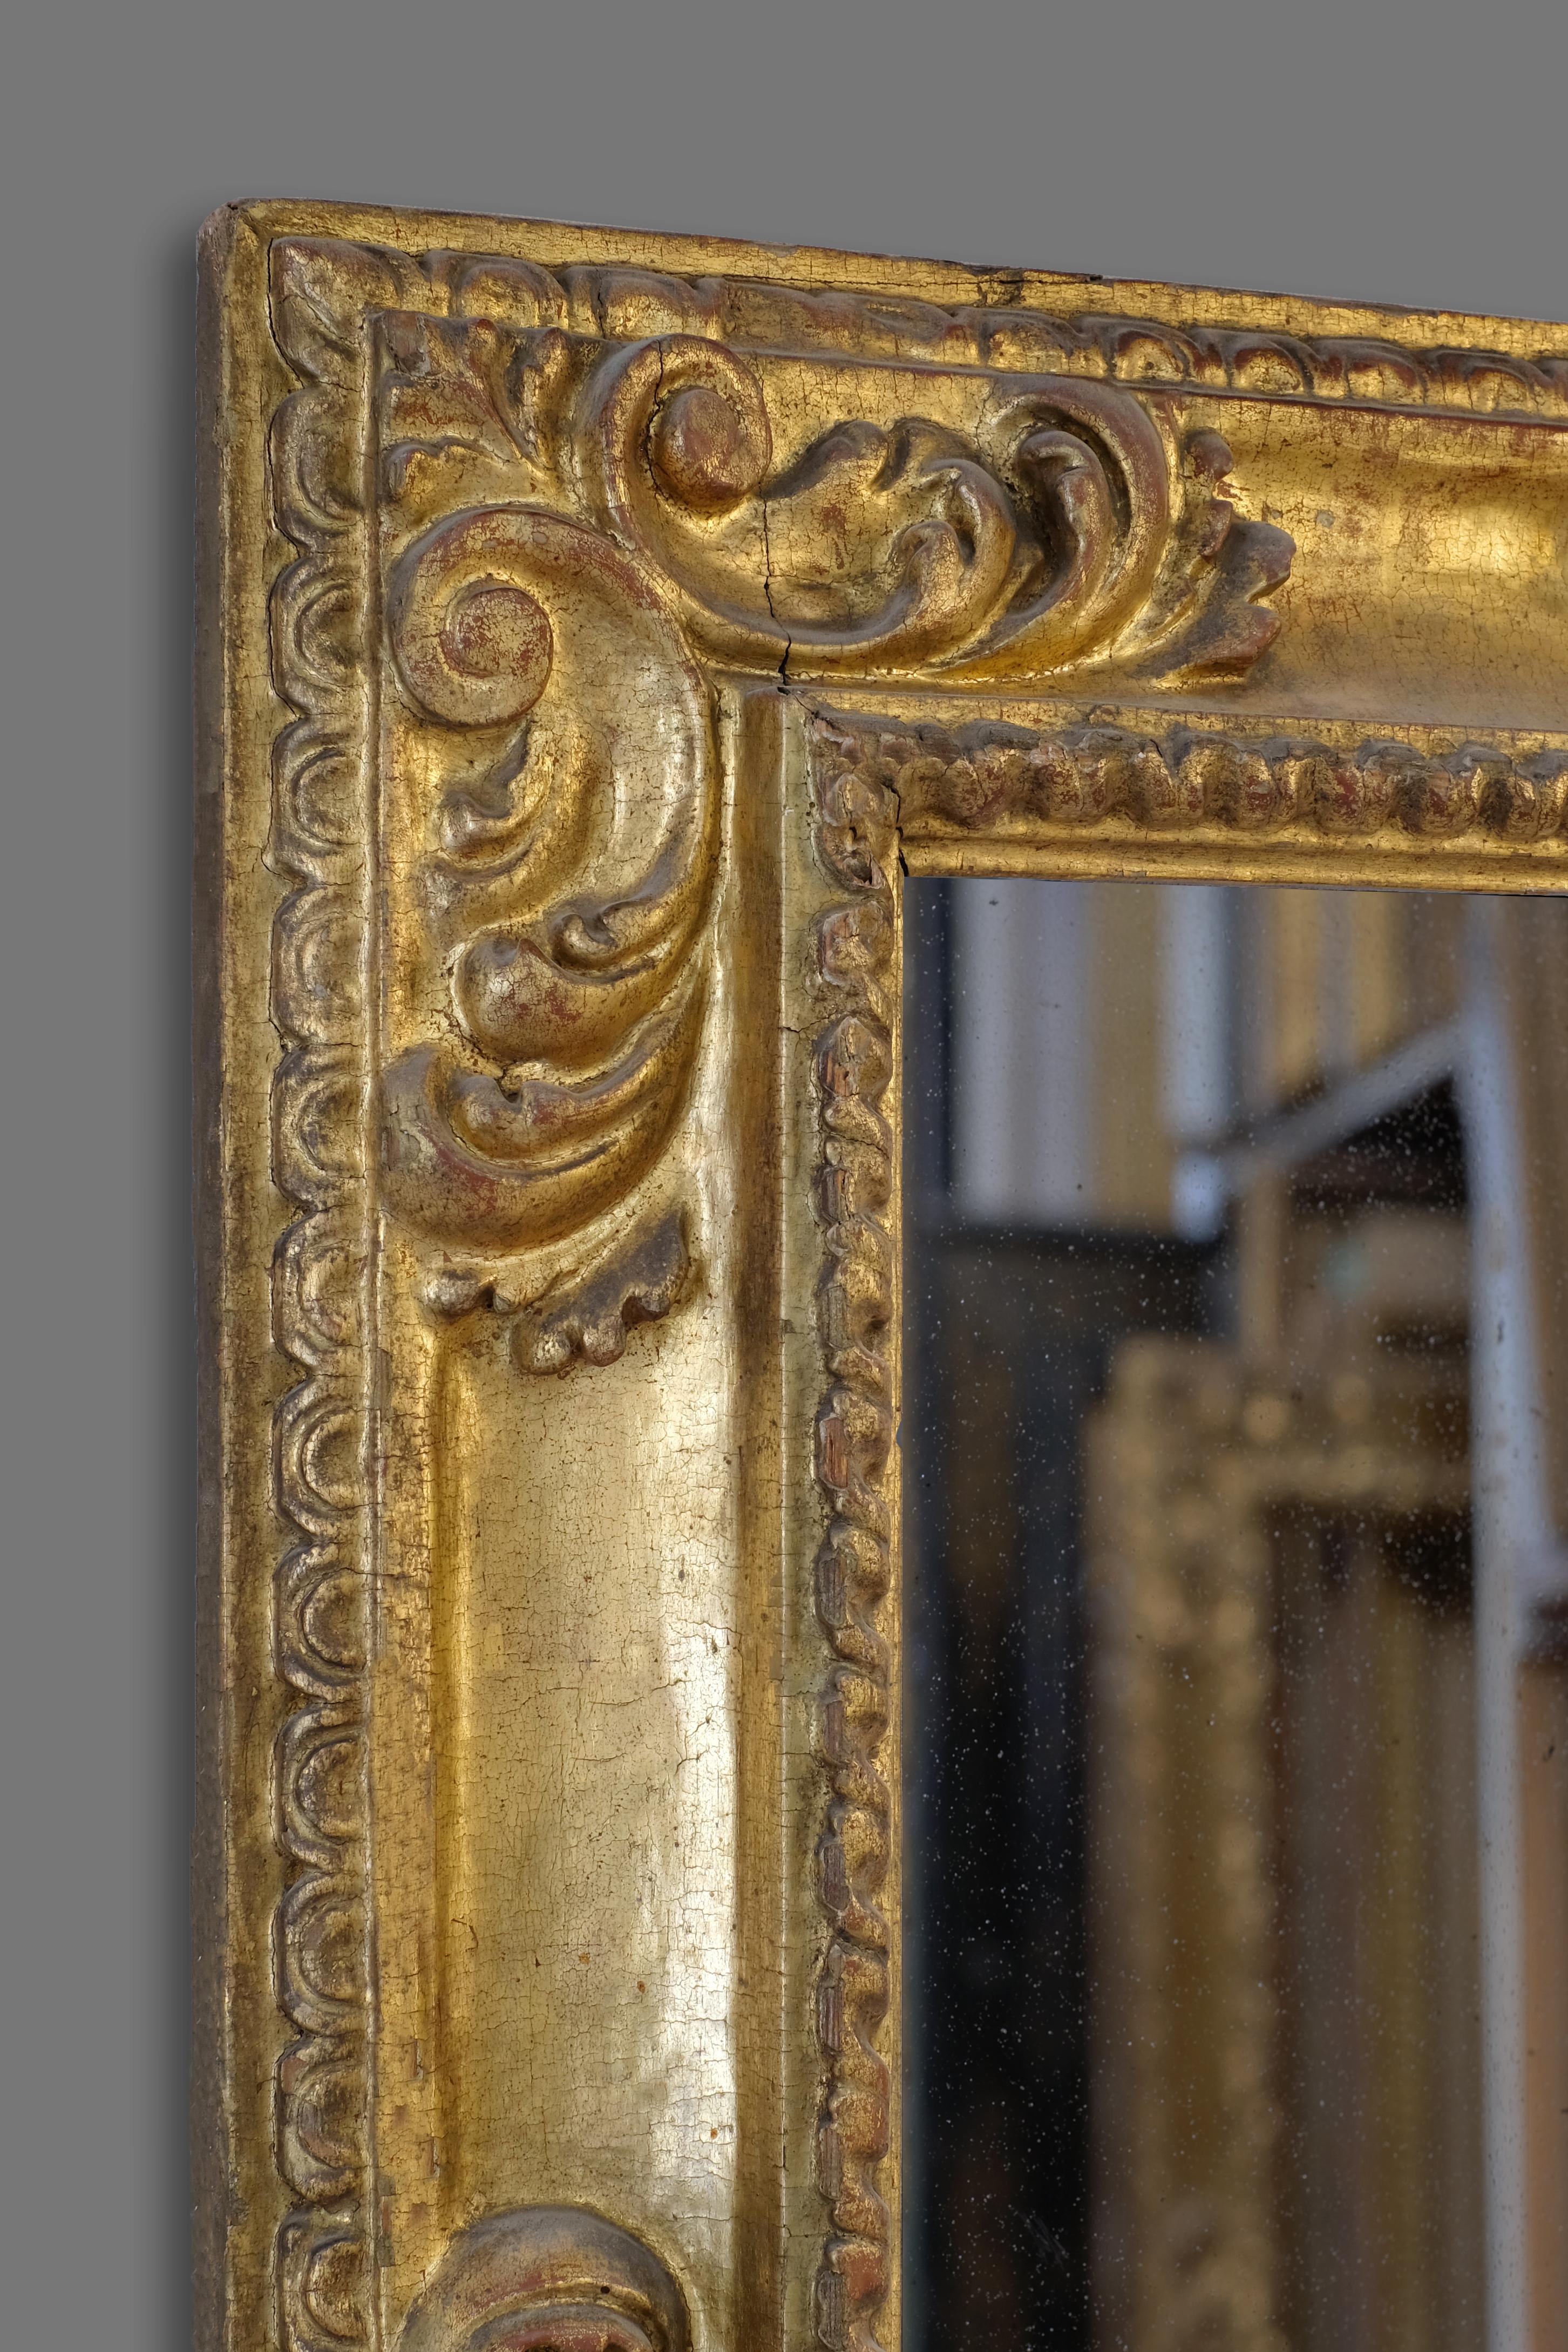 This exceptional 17th century hand carved Spanish Baroque frame is very rare and key example of its kind, with its carved gadrooned sight edge, corner and centre foliate scroll cartouches and scalloped back. The frame retains its well preserved